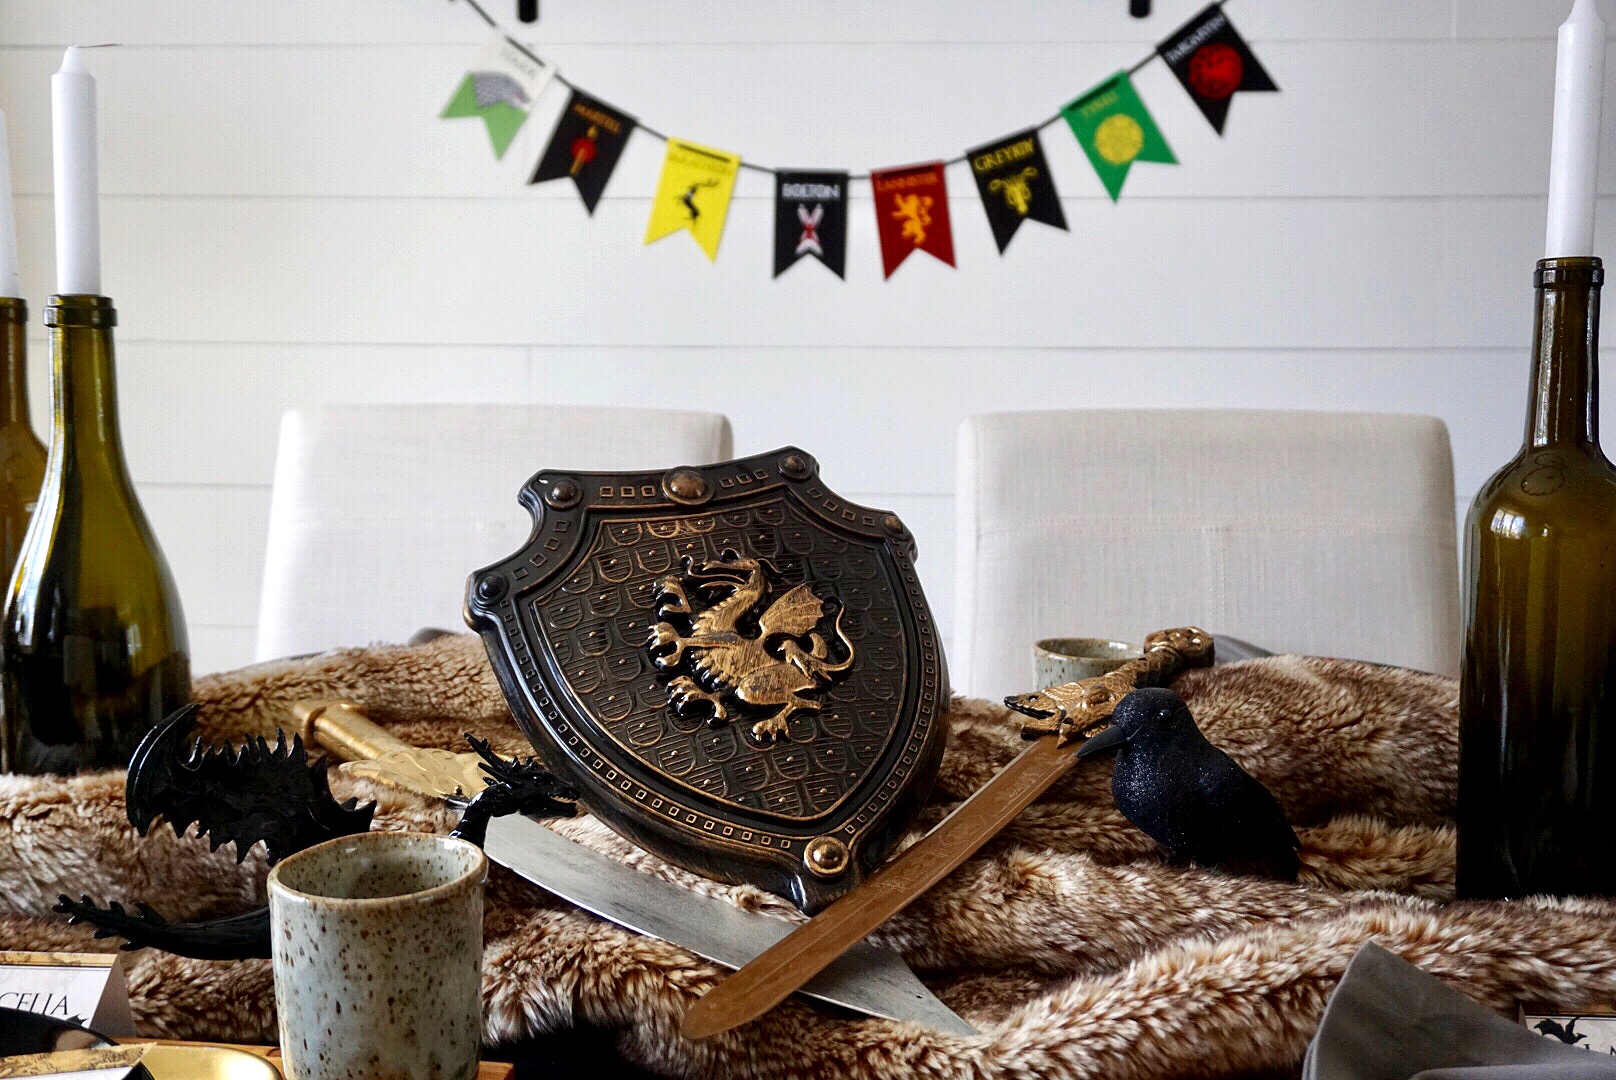  Game of Thrones dinner table with house banners 